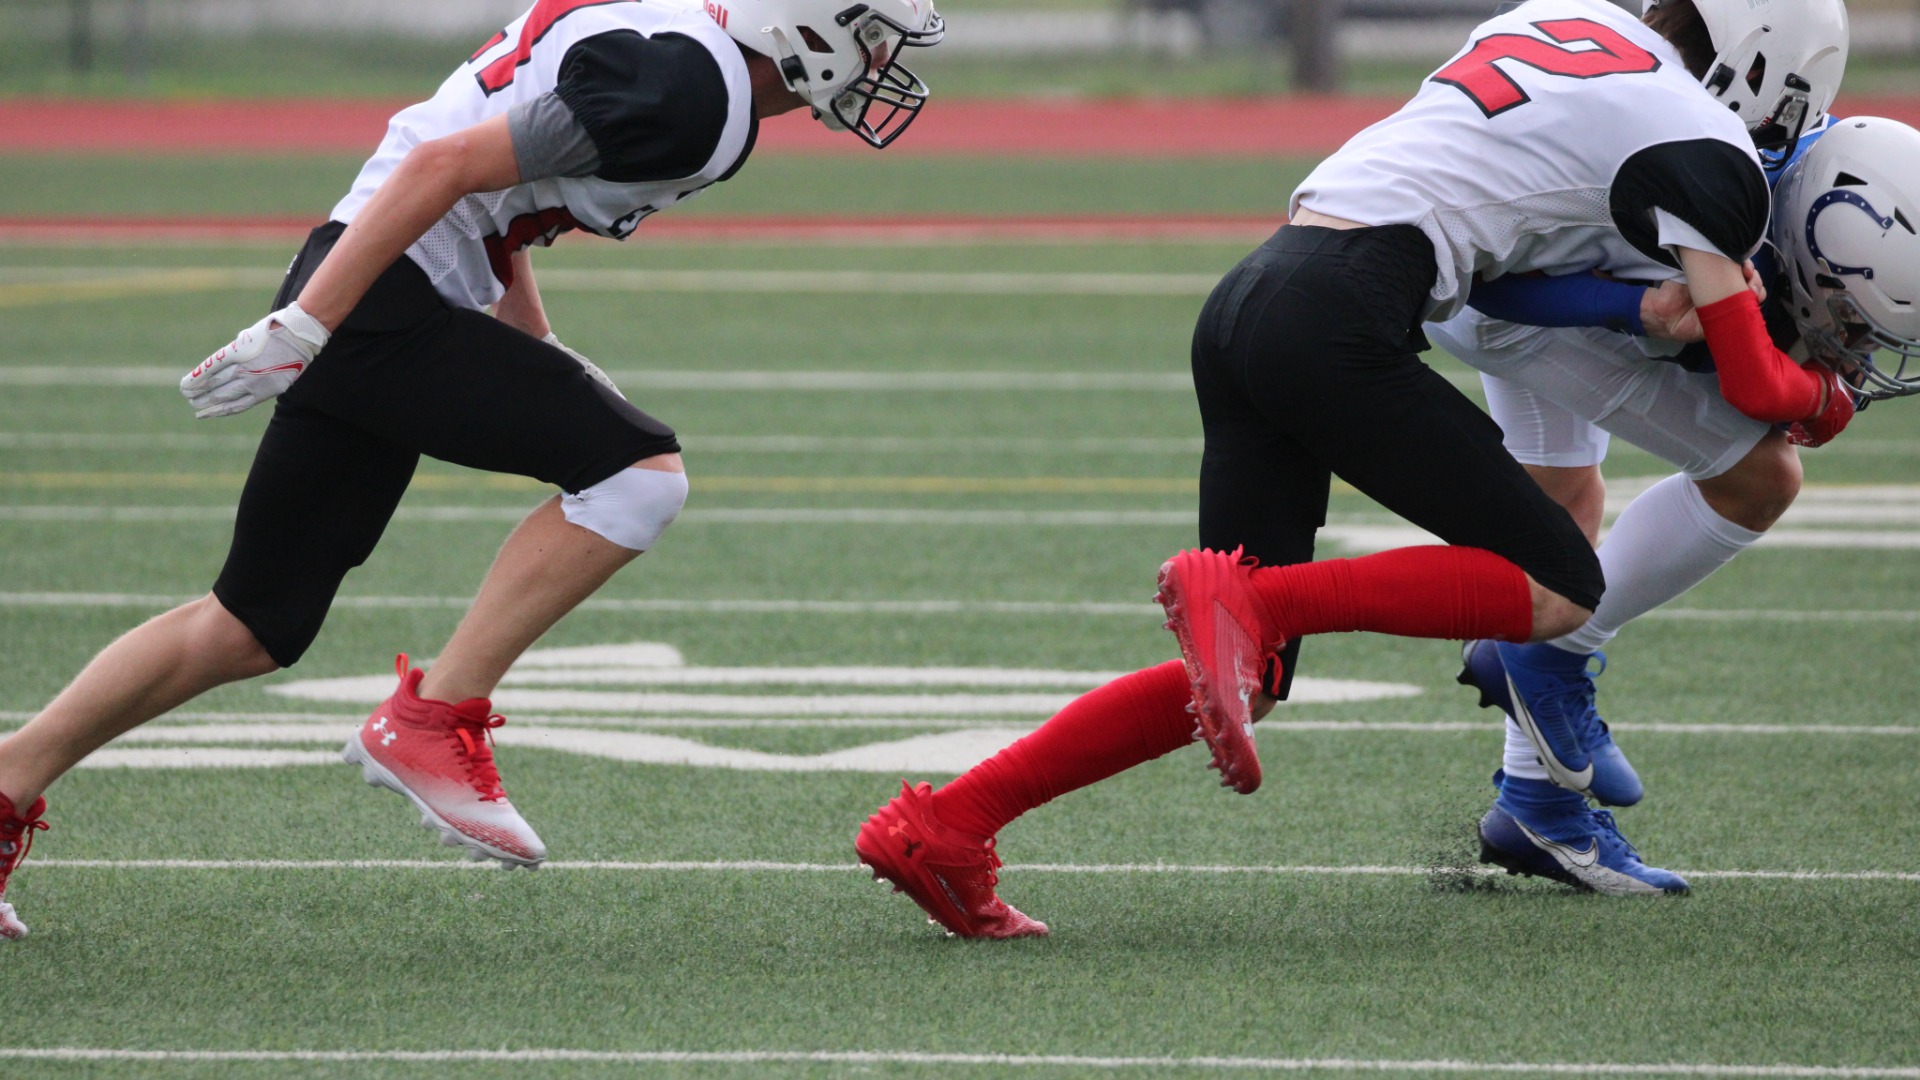 CMS EastSlide 9 - East 8th Grade Corrals the Colleyville Colts